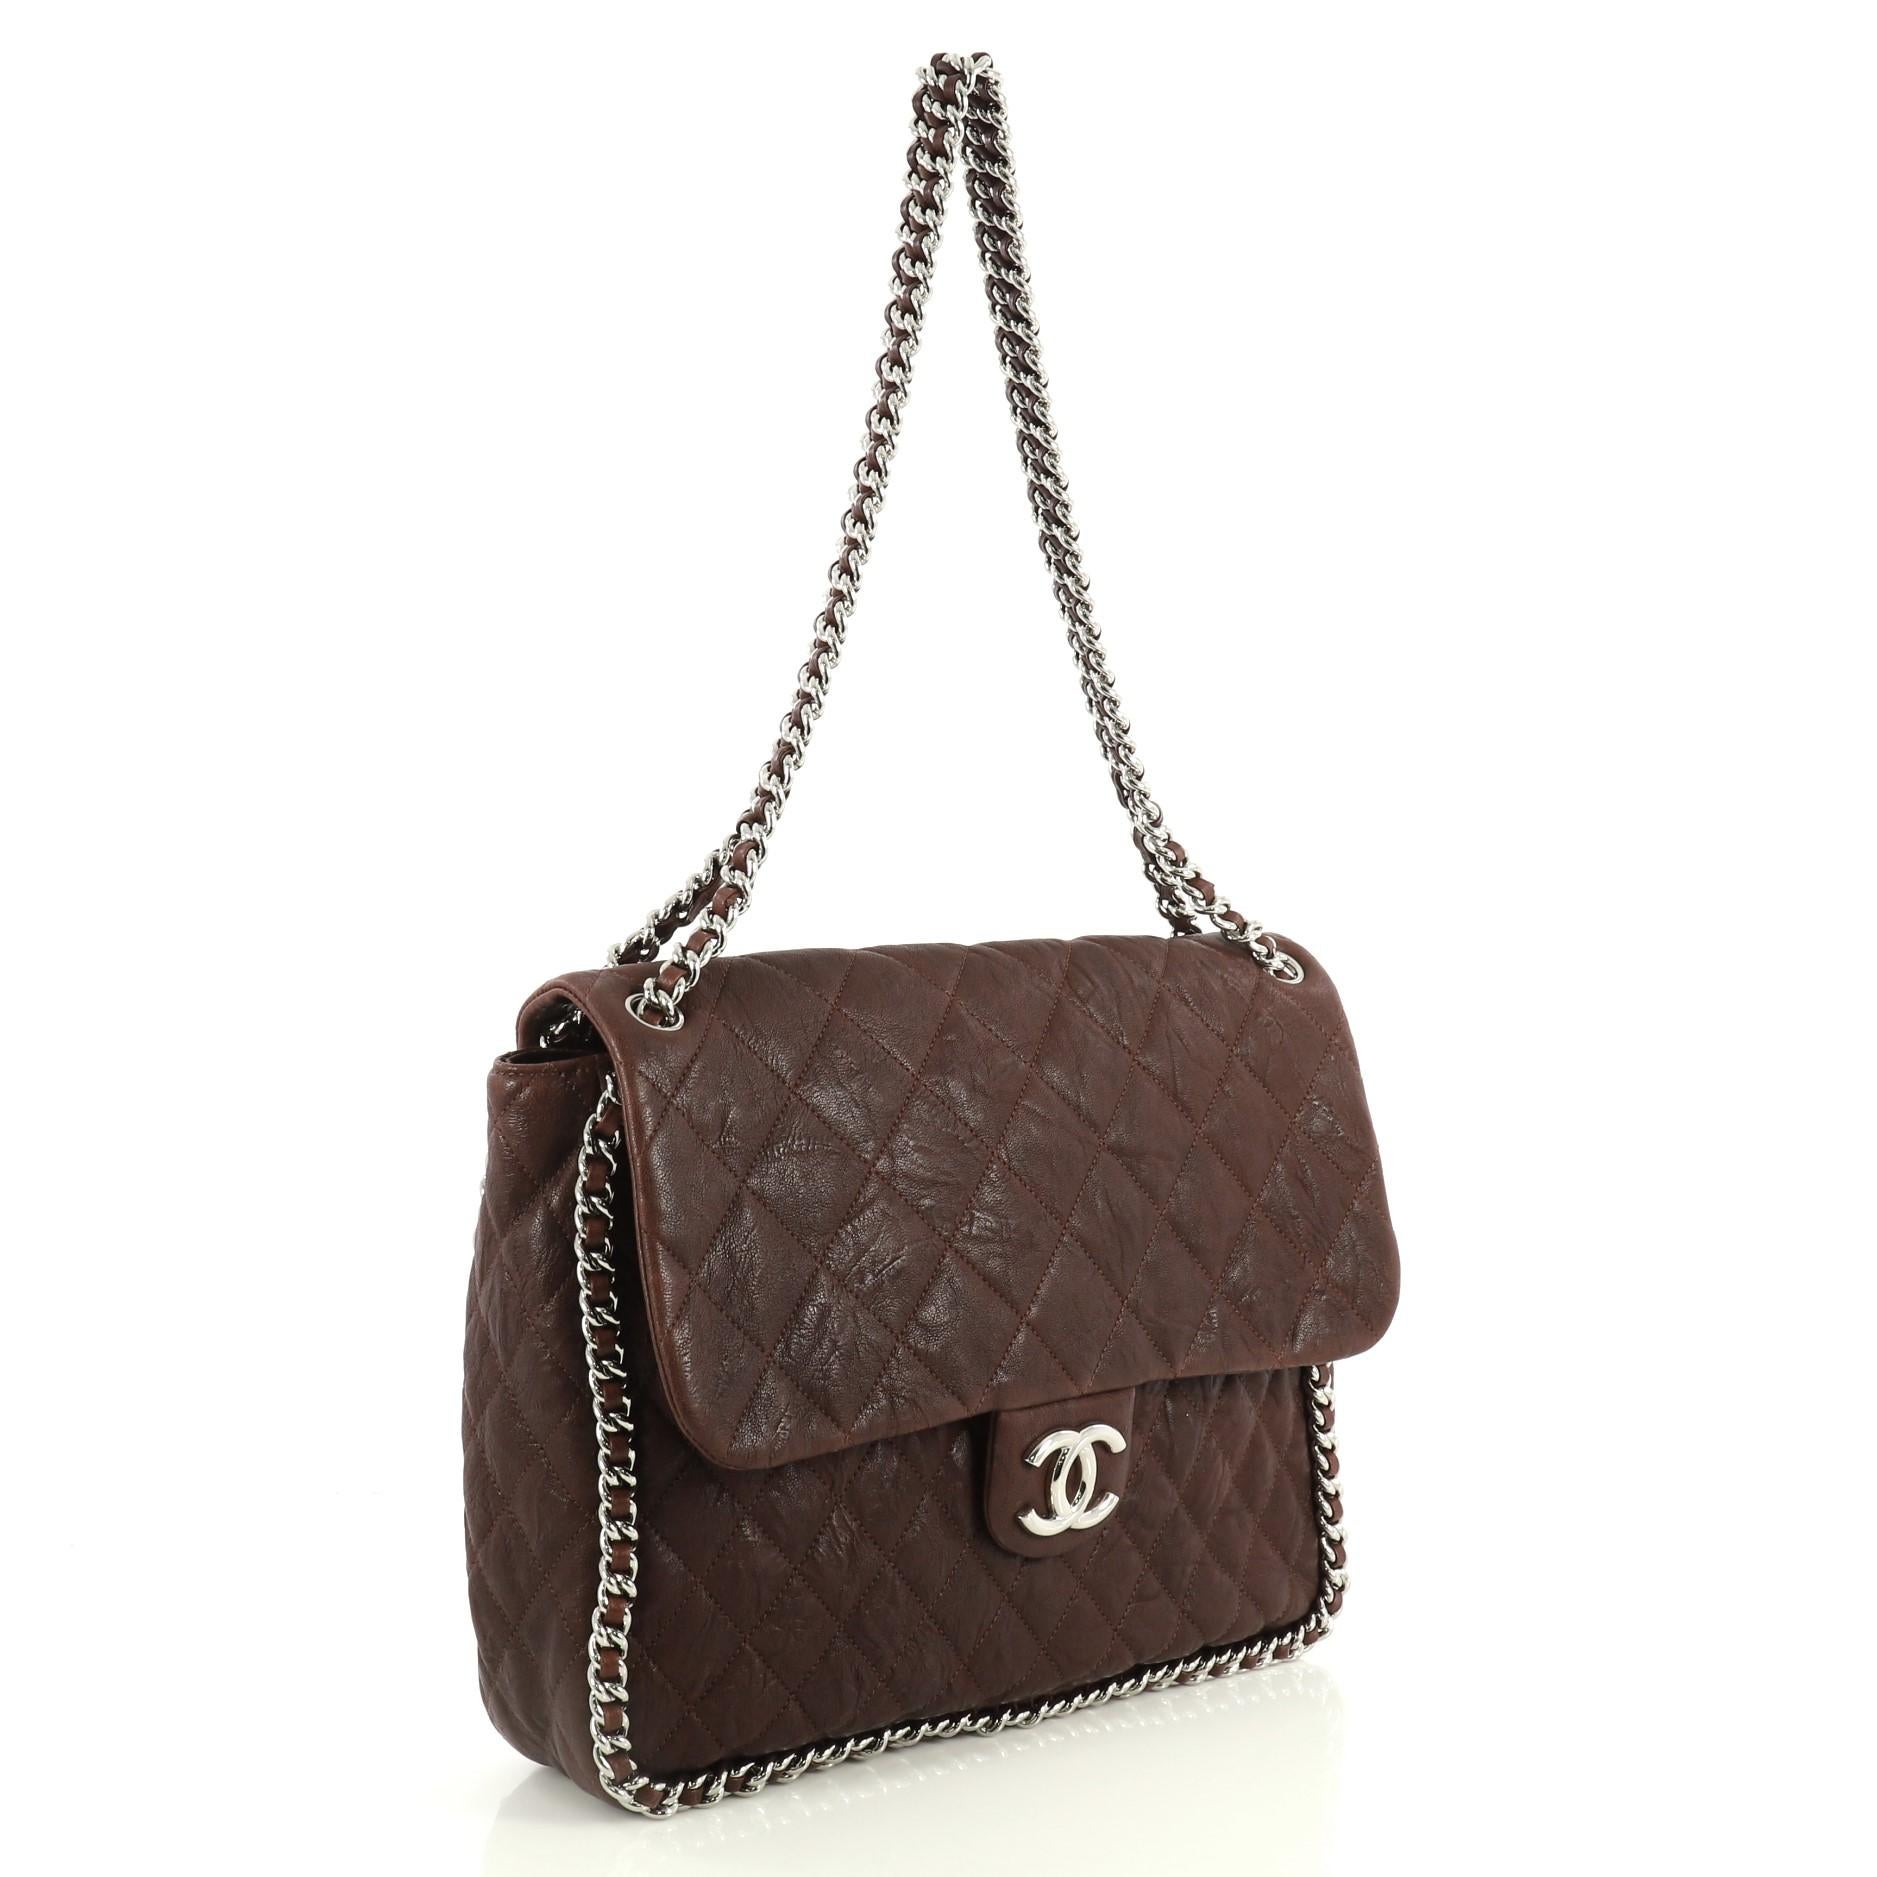 Black Chanel Chain Around Flap Bag Quilted Leather Maxi